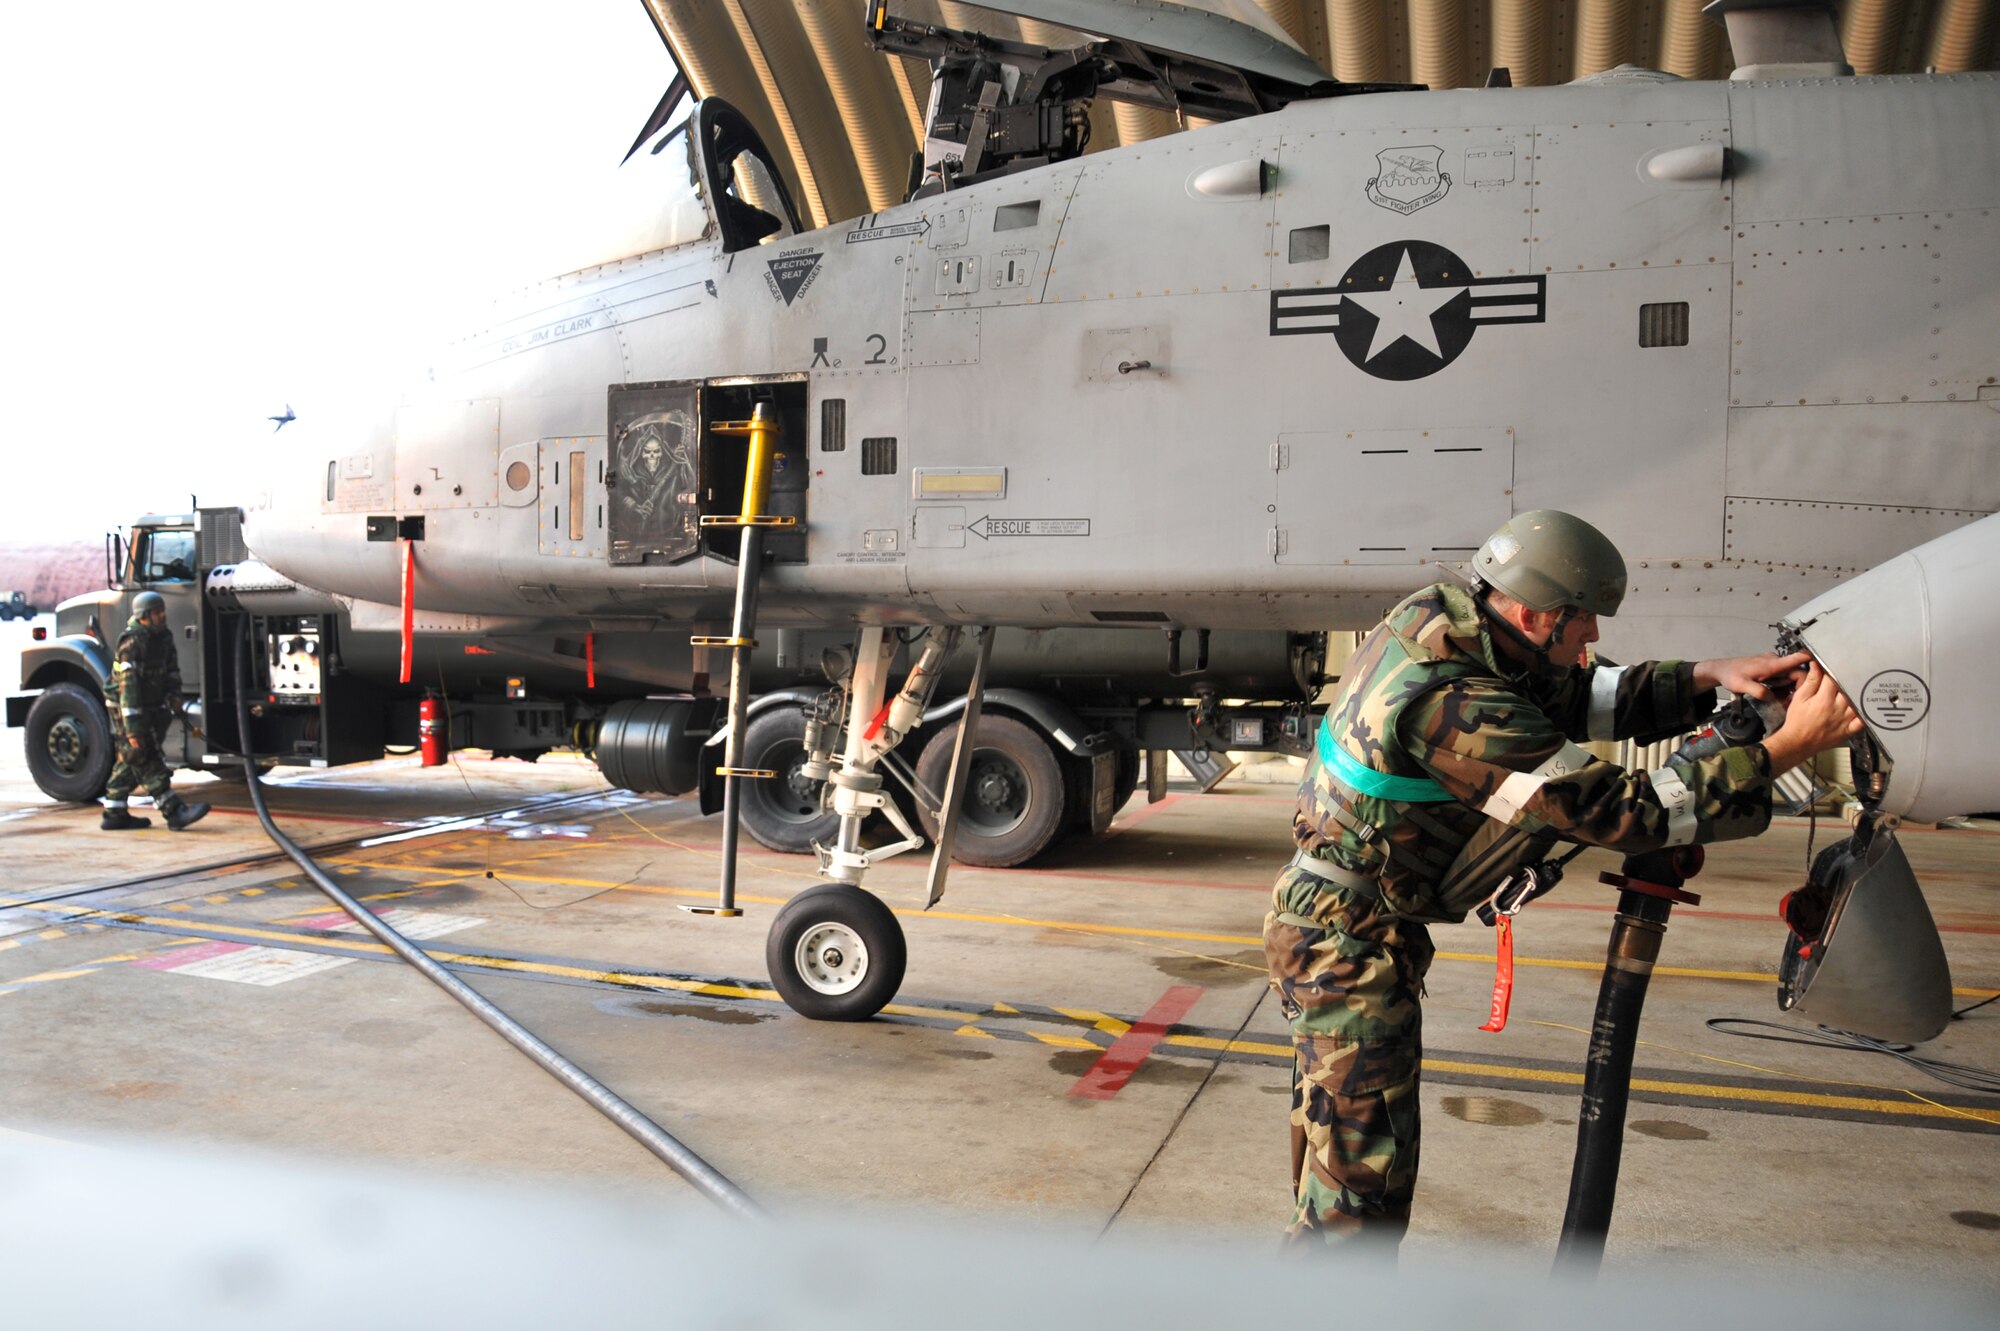 Staff Sgt. Caleb Parton, 51st Aircraft Maintenance Squadron crew chief, attaches a fuel hose to an A-10 Thunderbolt during Operational Readiness Exercise Beverly Midnight 13-03 at Osan Air Base, Republic of Korea, August 6, 2013. Osan Airmen are in the fourth simulated wartime contingency exercise executed in 2013 that will test the base's ability to defend and execute the mission in a heightened state of readiness. (U.S. Air Force photo/Staff Sgt. Emerson Nuñez)